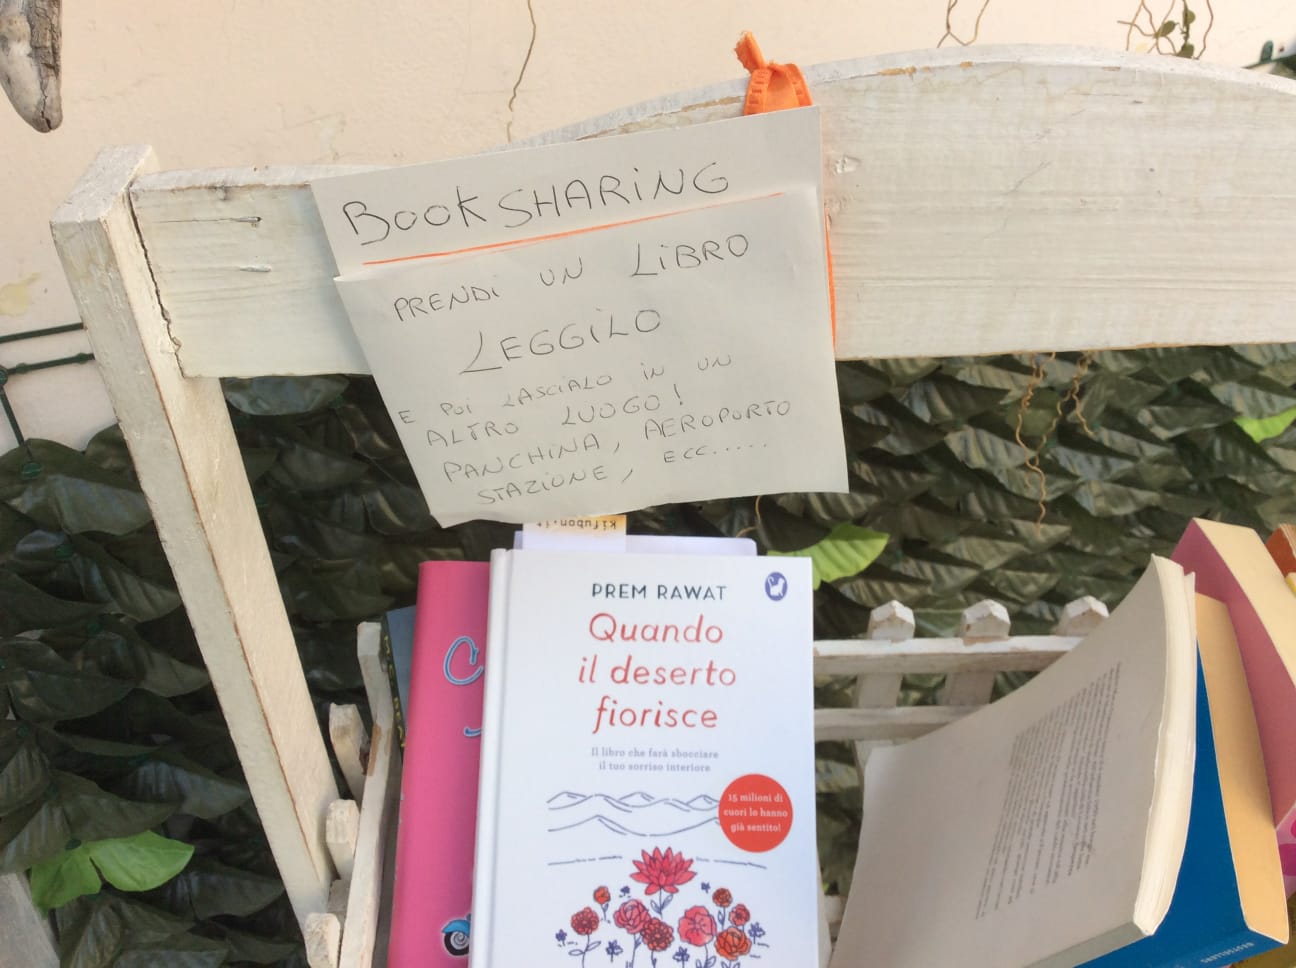 Book sharing a Montecatini Terme